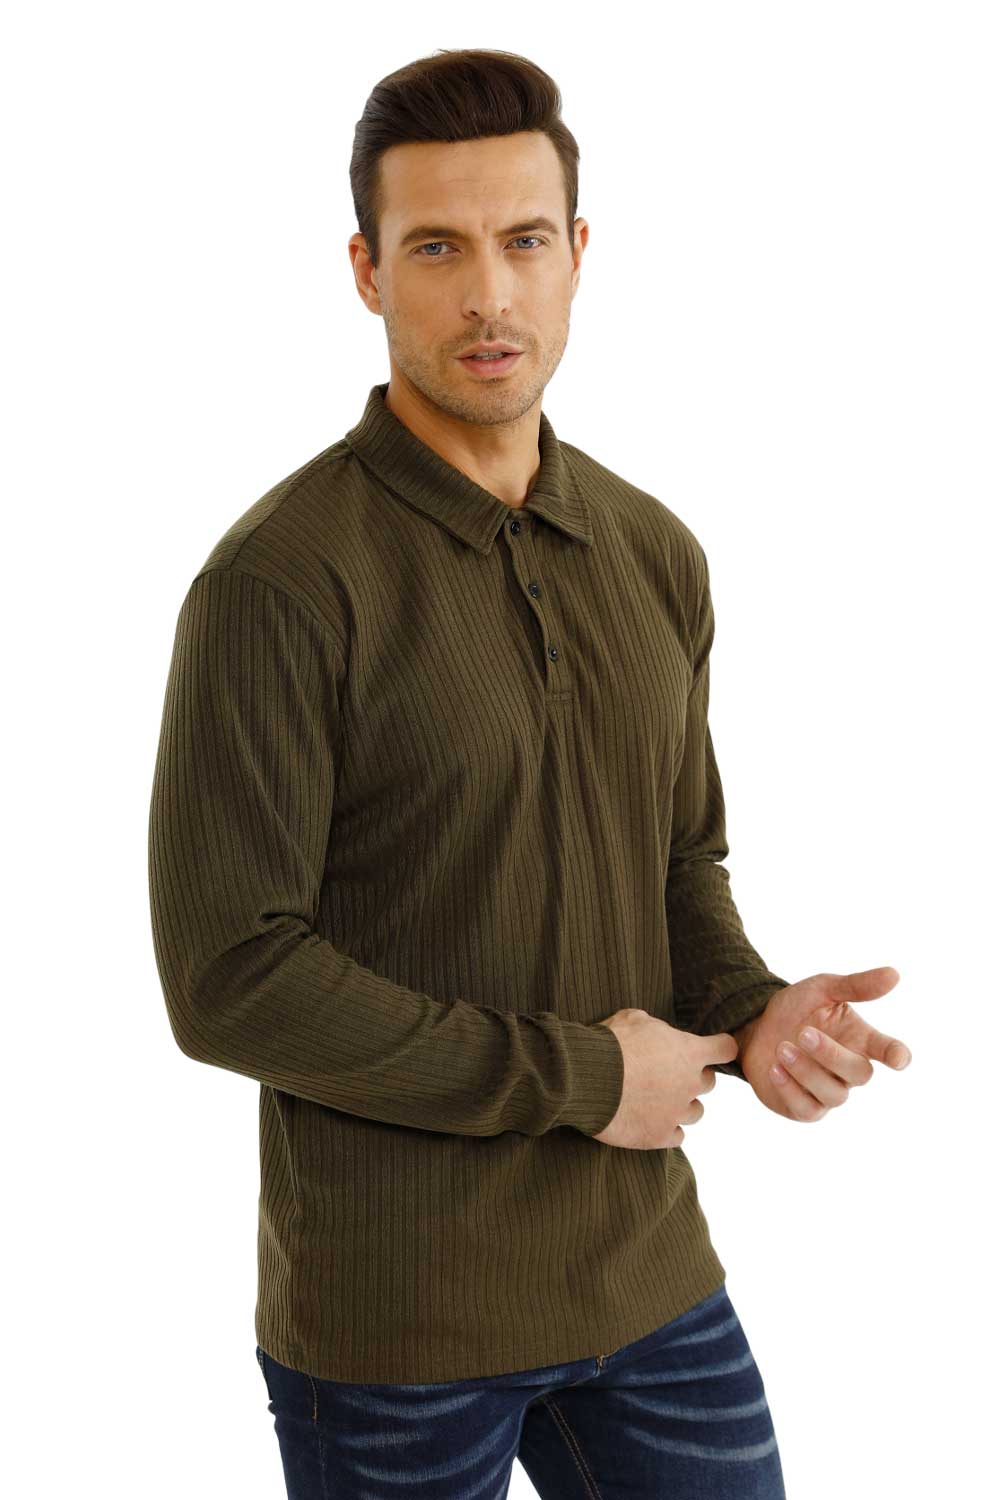 Gingtto's Classic Comfortable Polo Shirts for Men: Your Style, Your Way